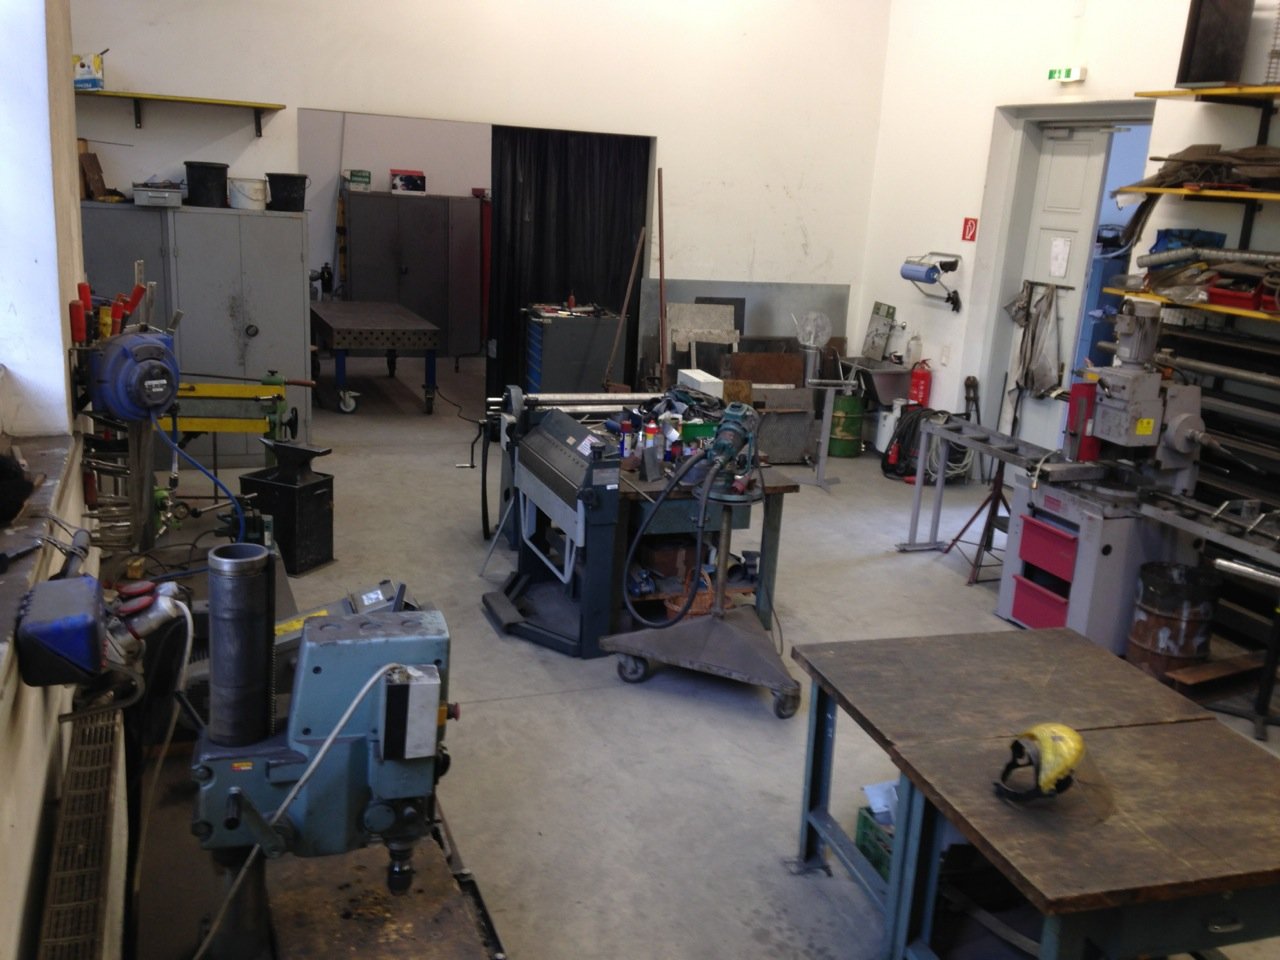 View into the metalworking workshop